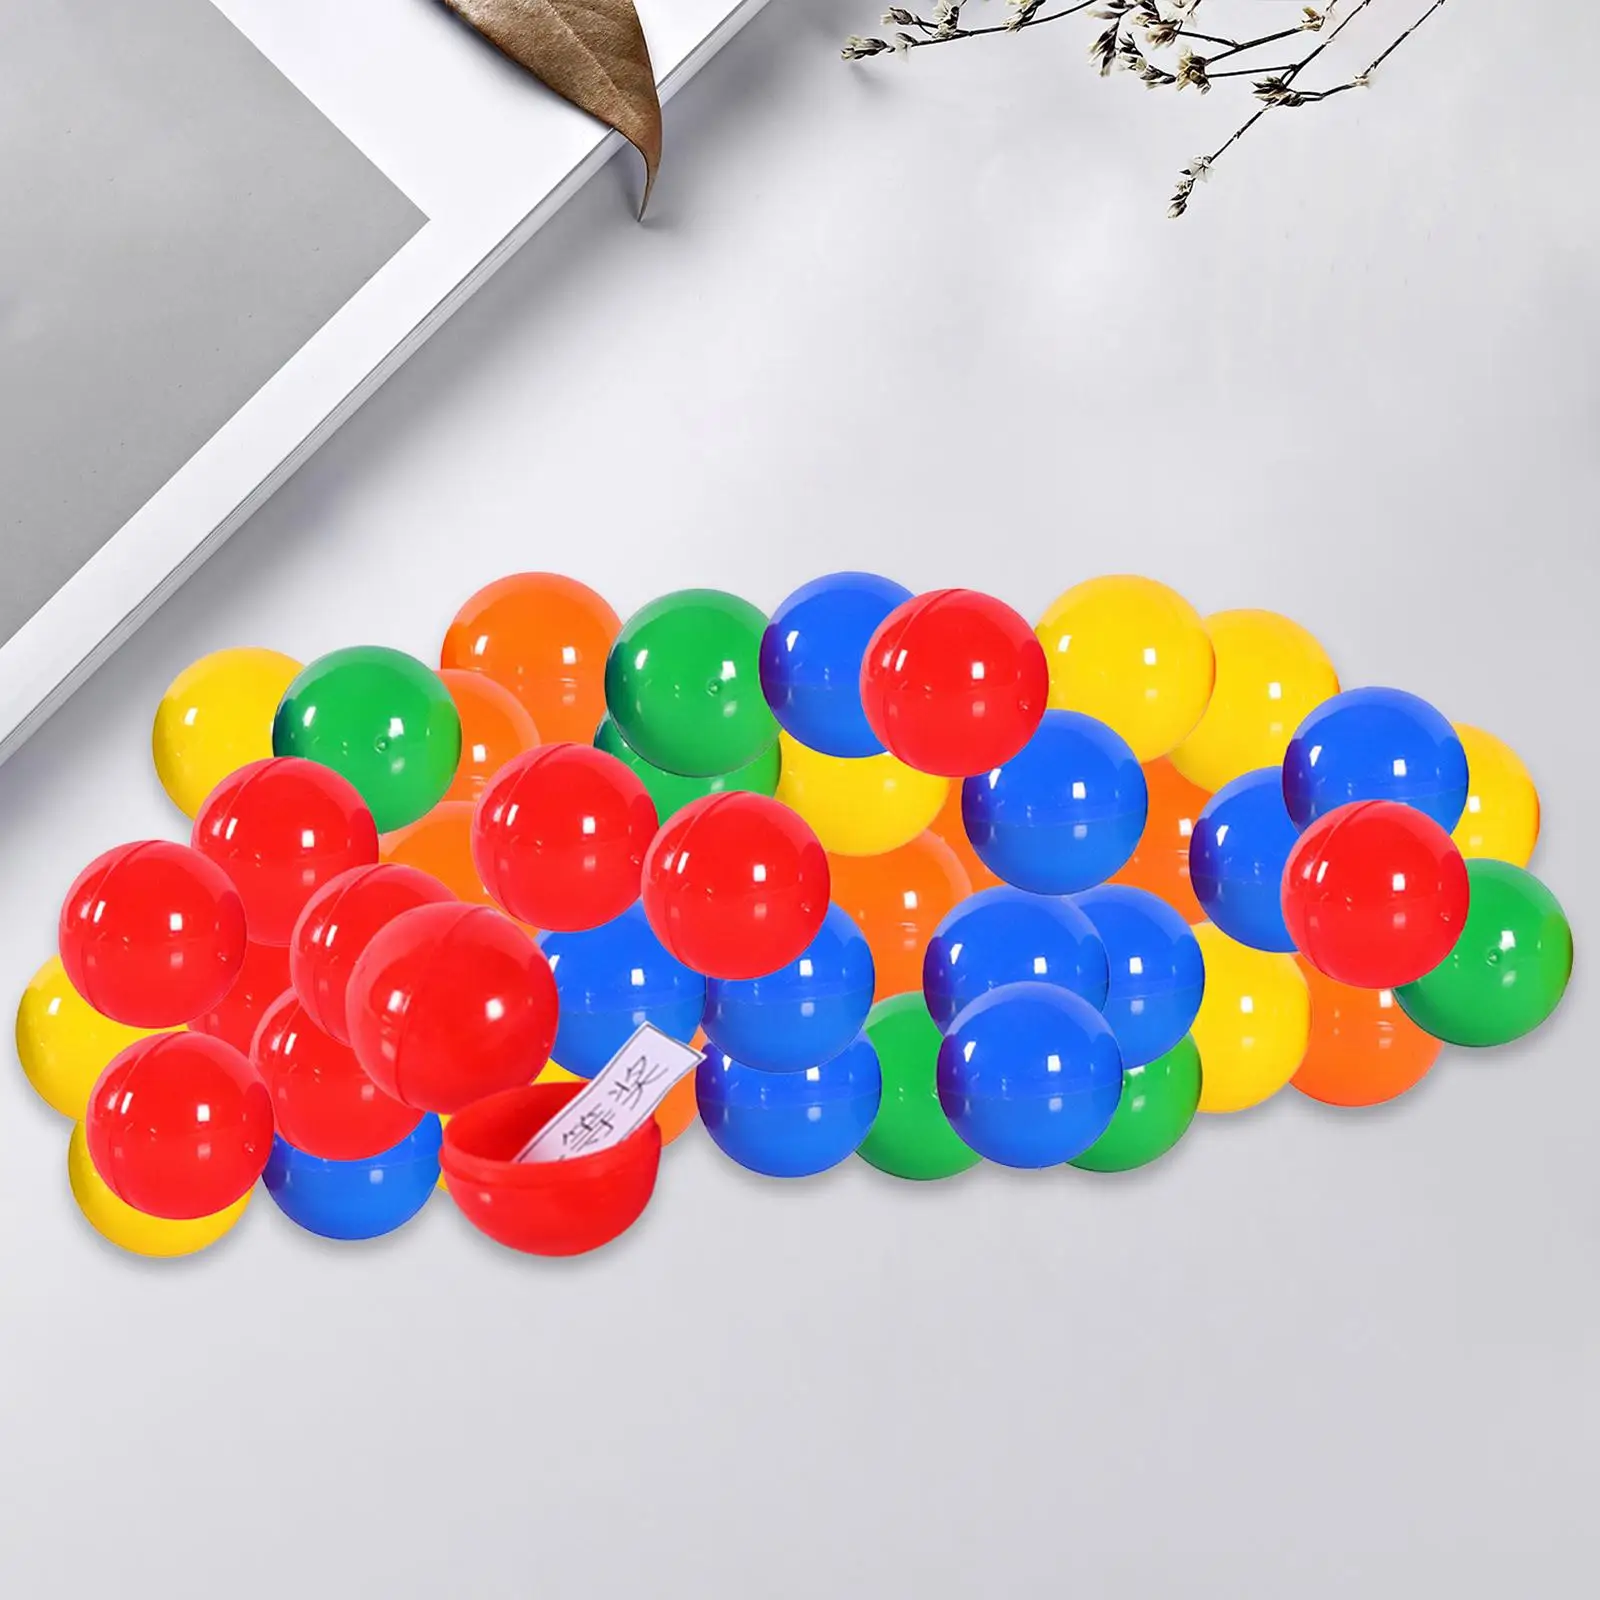 50Pcs Bingo Ball Opening Portable Direct Replaces Accessories Lottery Balls for